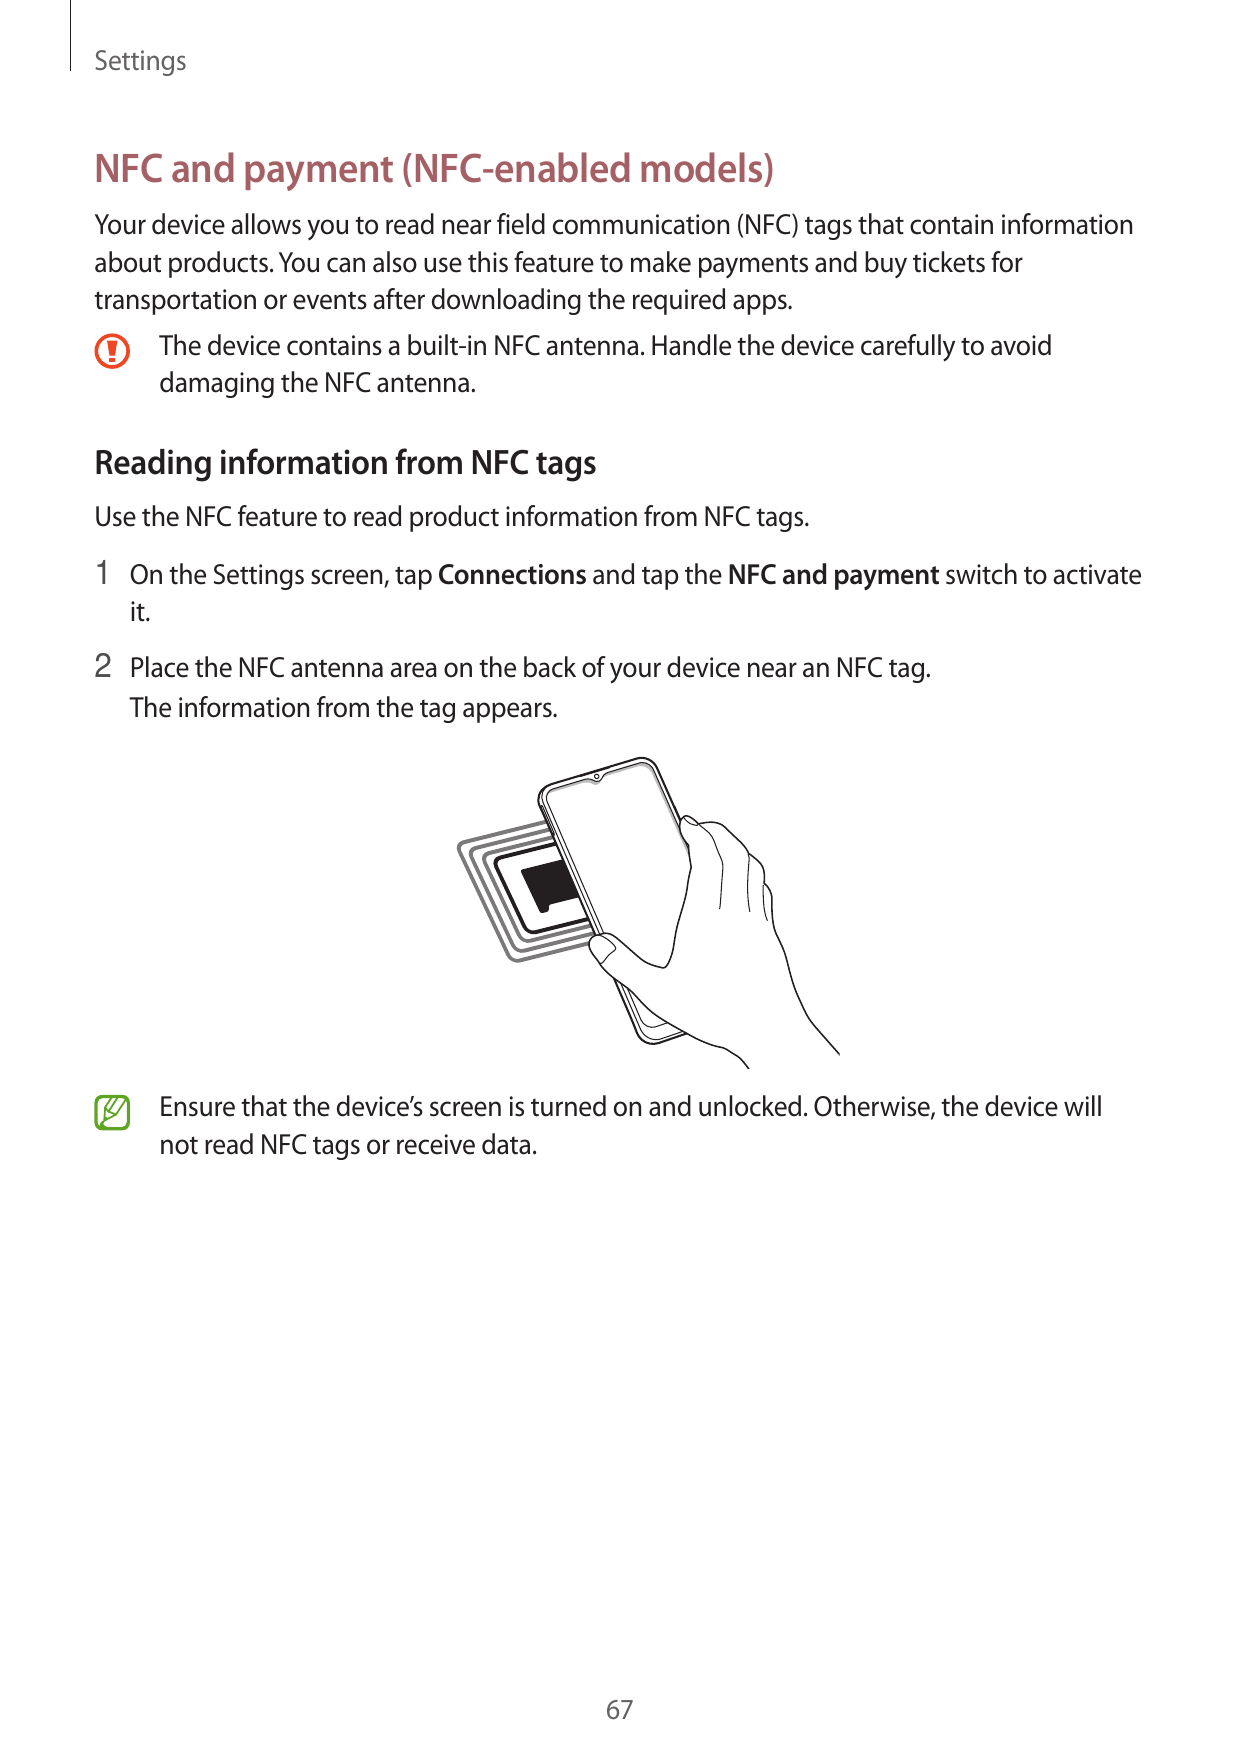 SettingsNFC and payment (NFC-enabled models)Your device allows you to read near field communication (NFC) tags that contain info